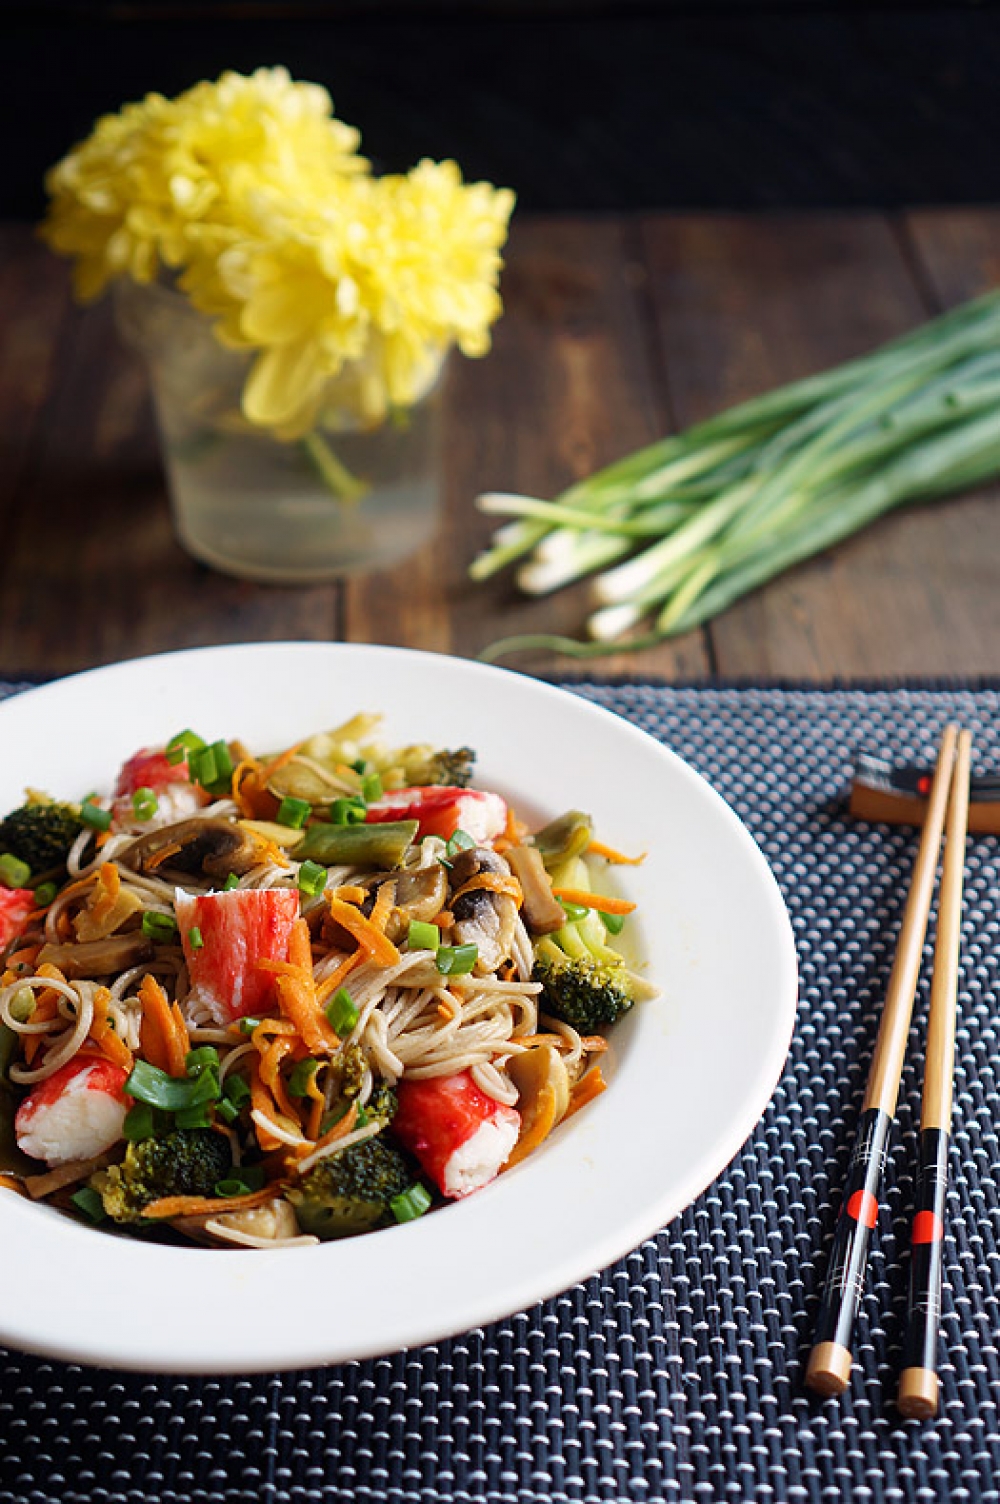 Buckwheat Noodles with Vegetables and Seafood